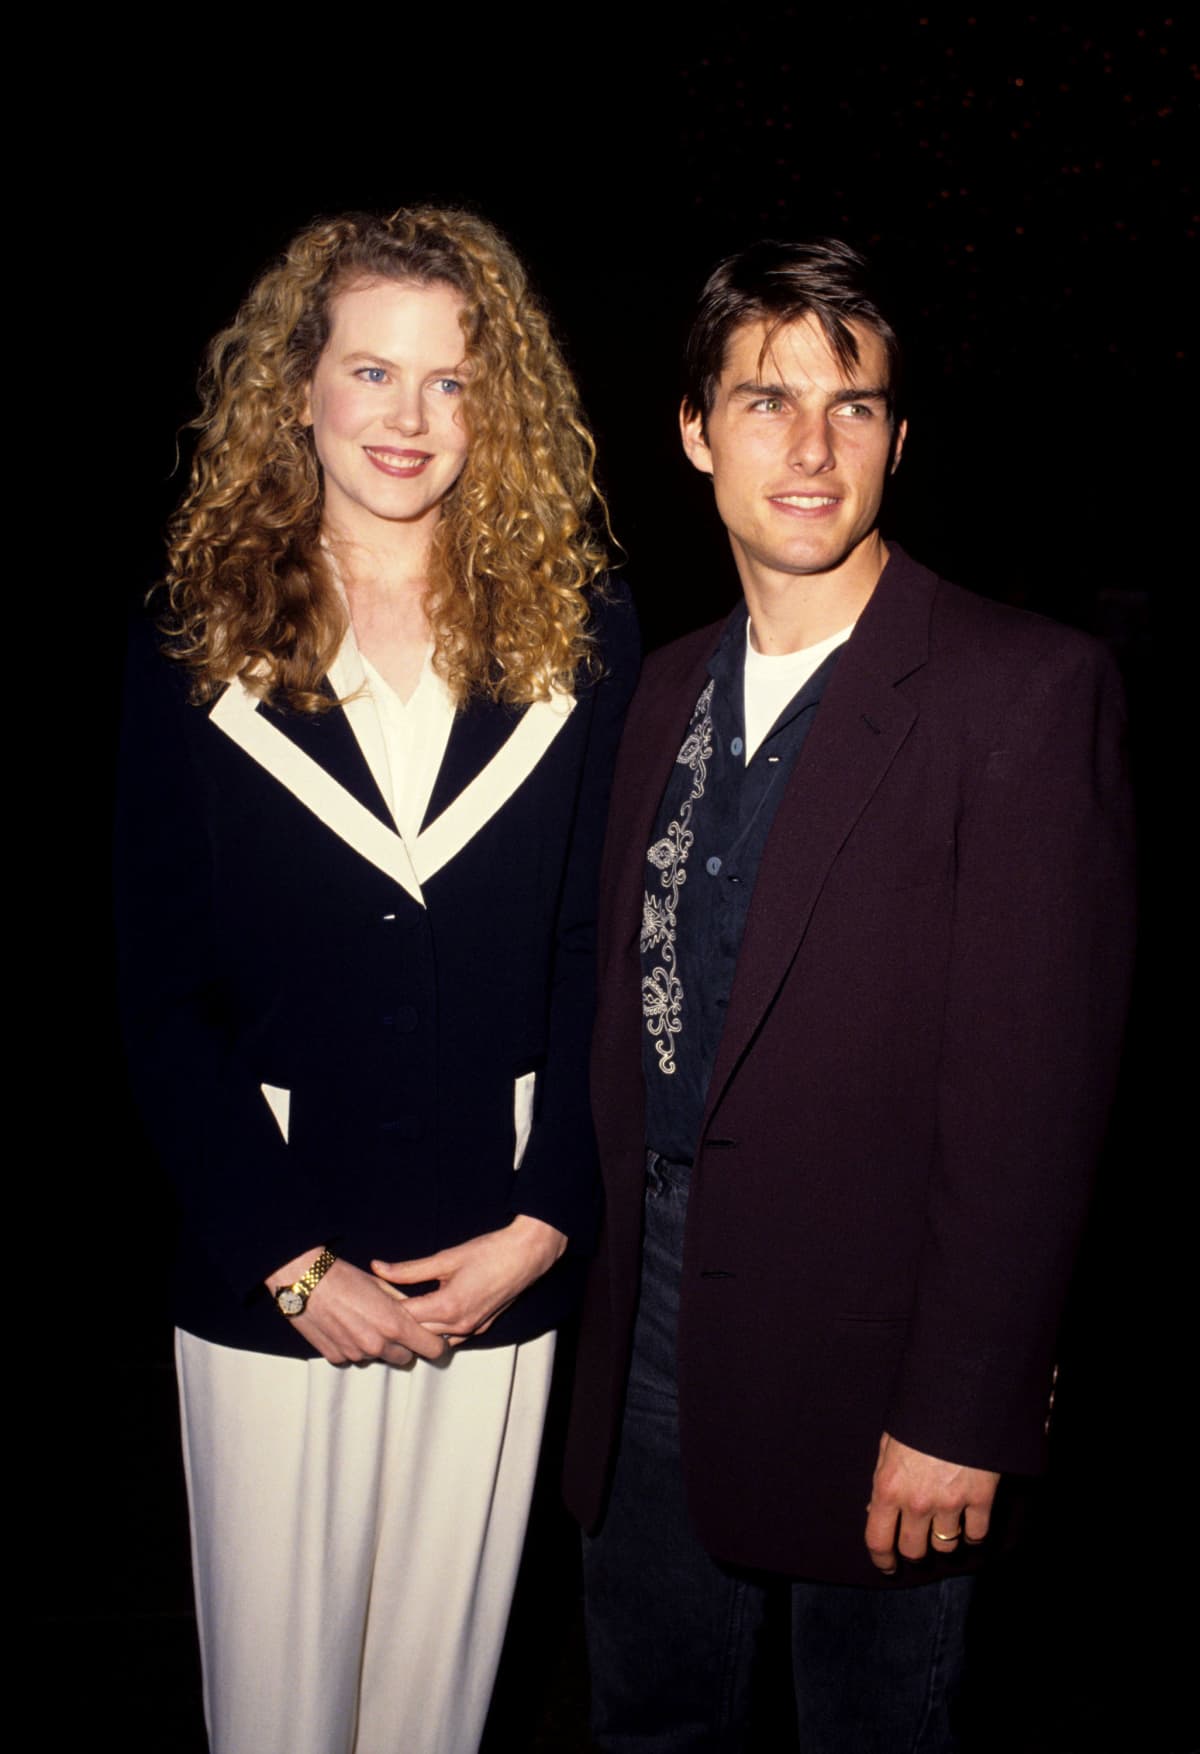 370226 12: FILE PHOTO: Actor Tom Cruise and his wife Nicole Kidman pose for photographers at the Sydney premiere of "Mission Impossible 2" May 30, 2000 at Fox Studios in Australia. Cruise and Kidman, one of the Hollywood's best-known couples, announced February 5, 2001 that they are separating after more than a decade of marriage. (Photo by Matt Turner/Liaison)